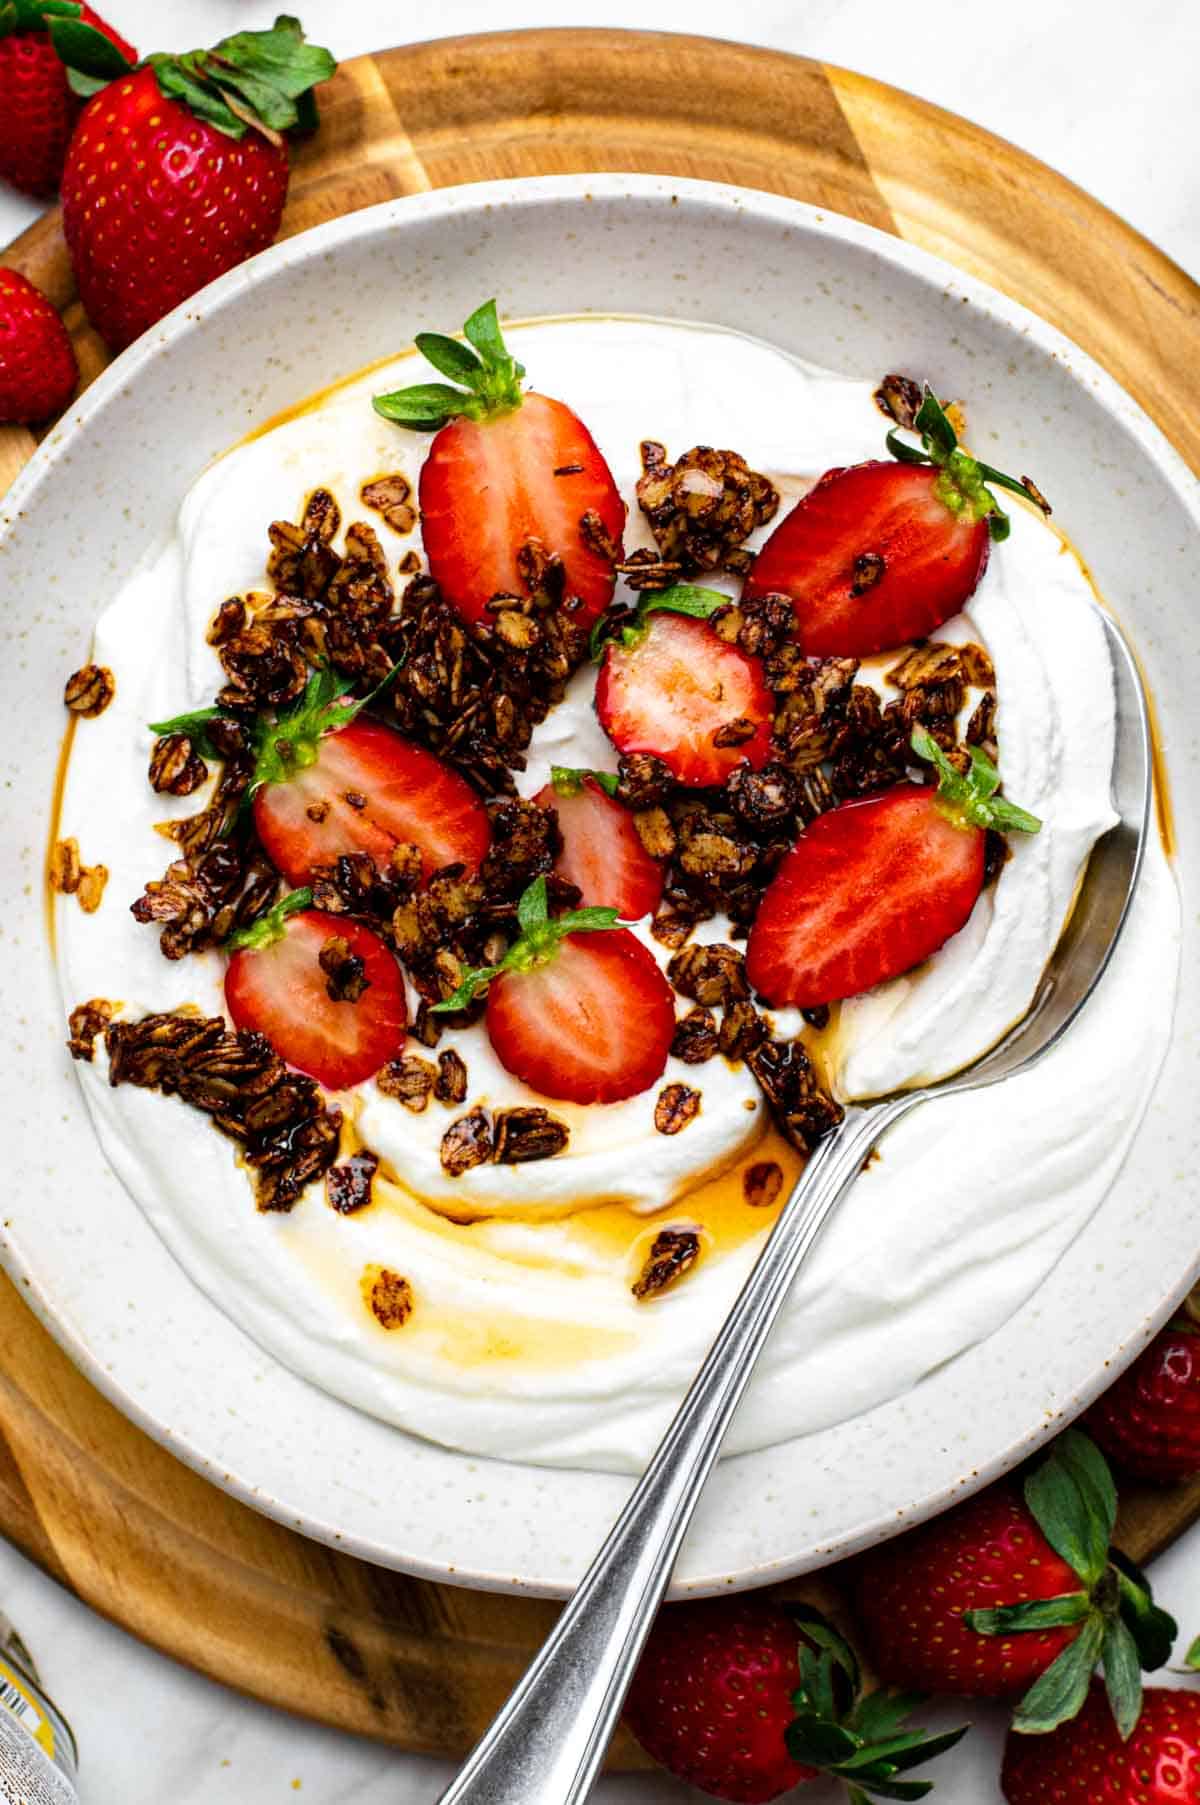 Whipped cottage cheese served in a bowl and topped with maple syrup, granola and fresh berries.